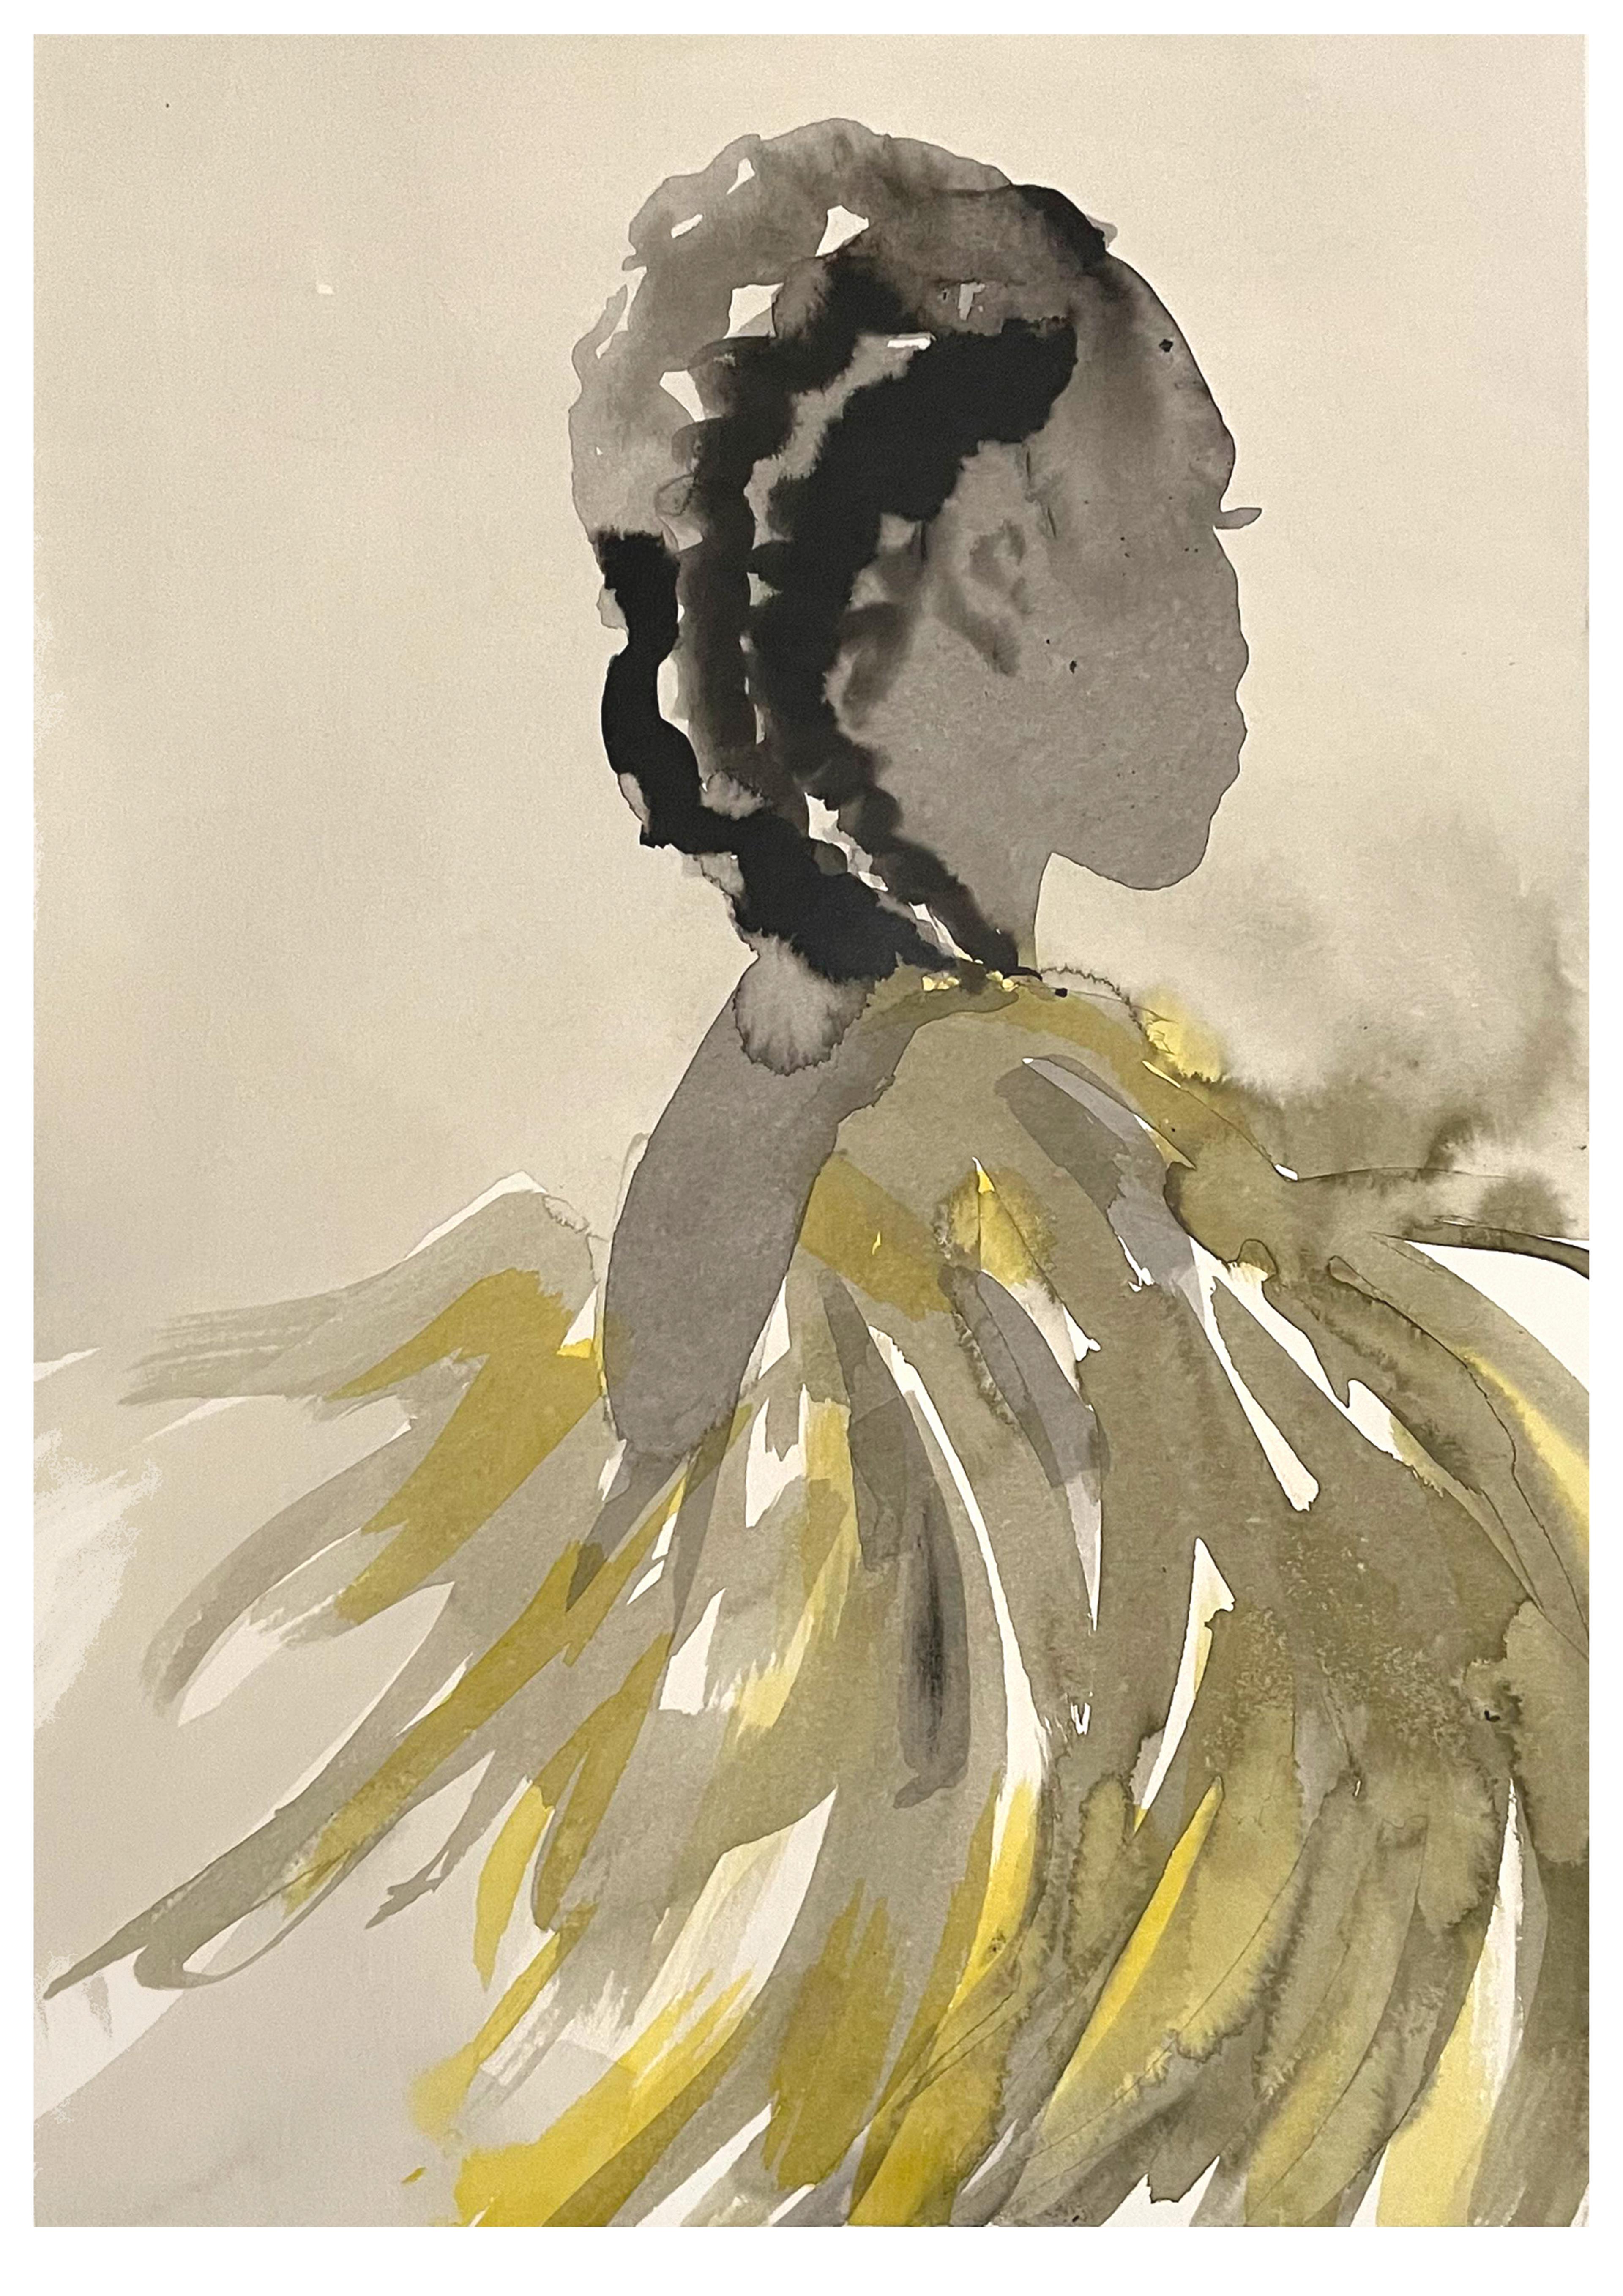 Illustration of person from the back with braided hair and flowing yellow top